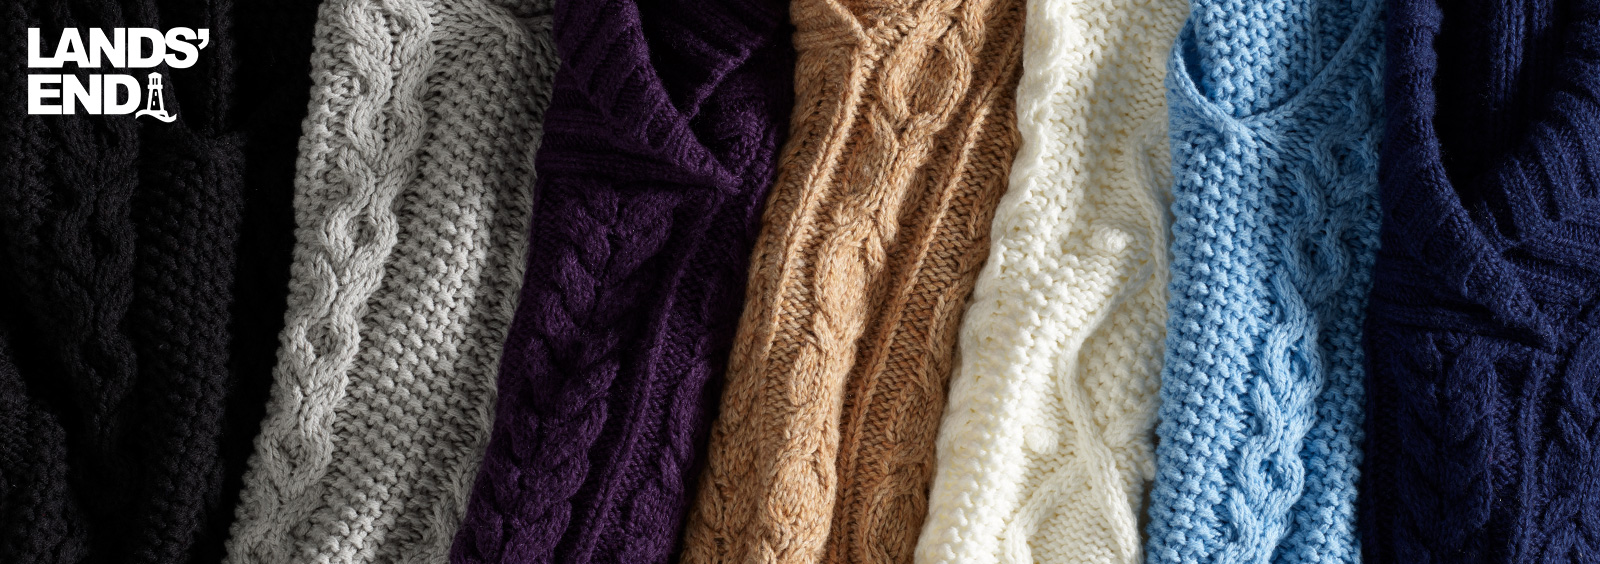 8 Sweaters Every Woman Should Have